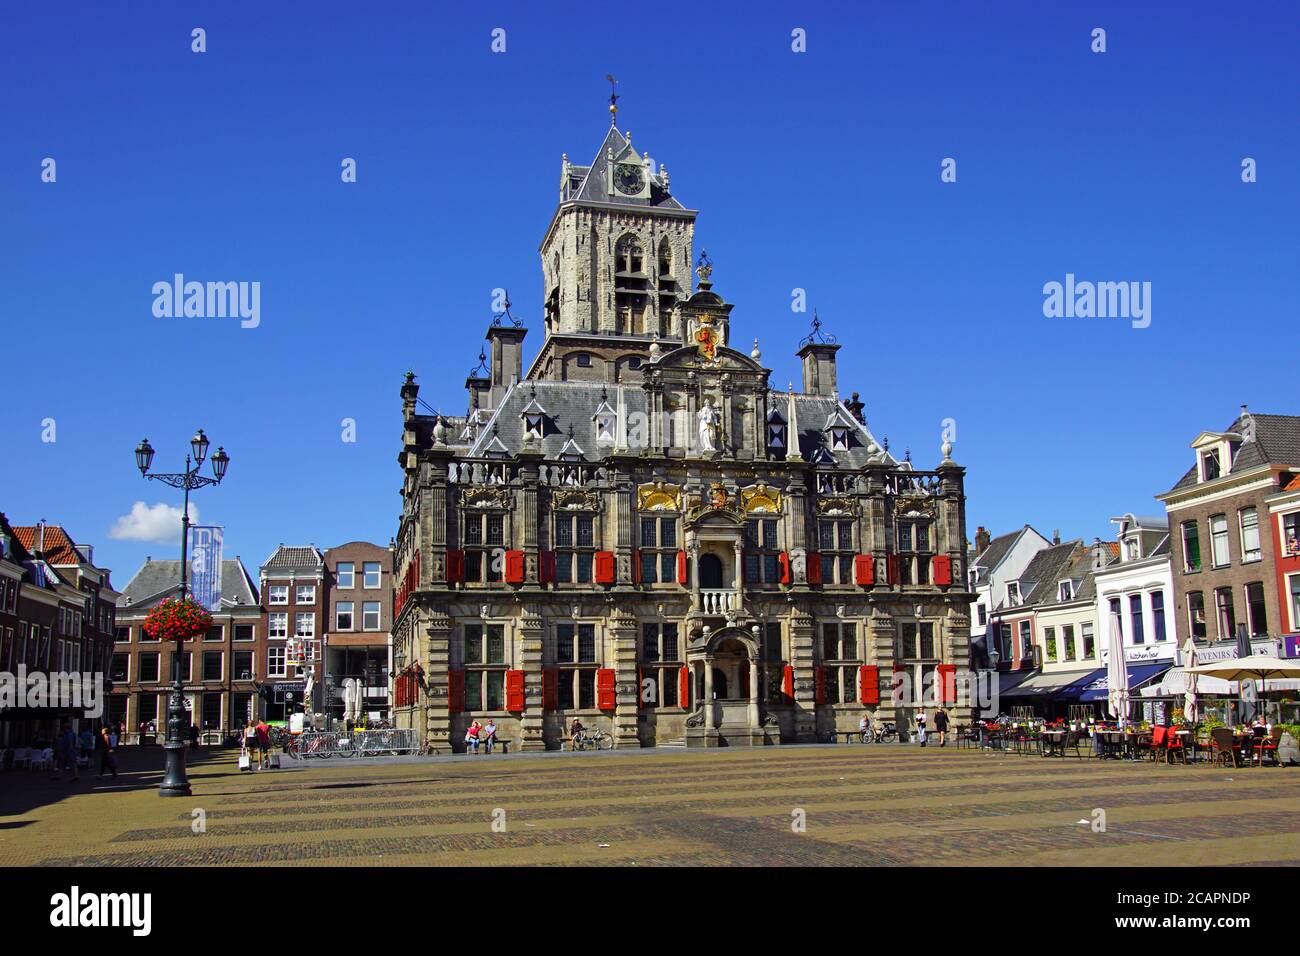 Delft, the Netherlands - August 5, 2020: The city hall of the Dutch city of Delft against a clear blue sky. Stock Photo